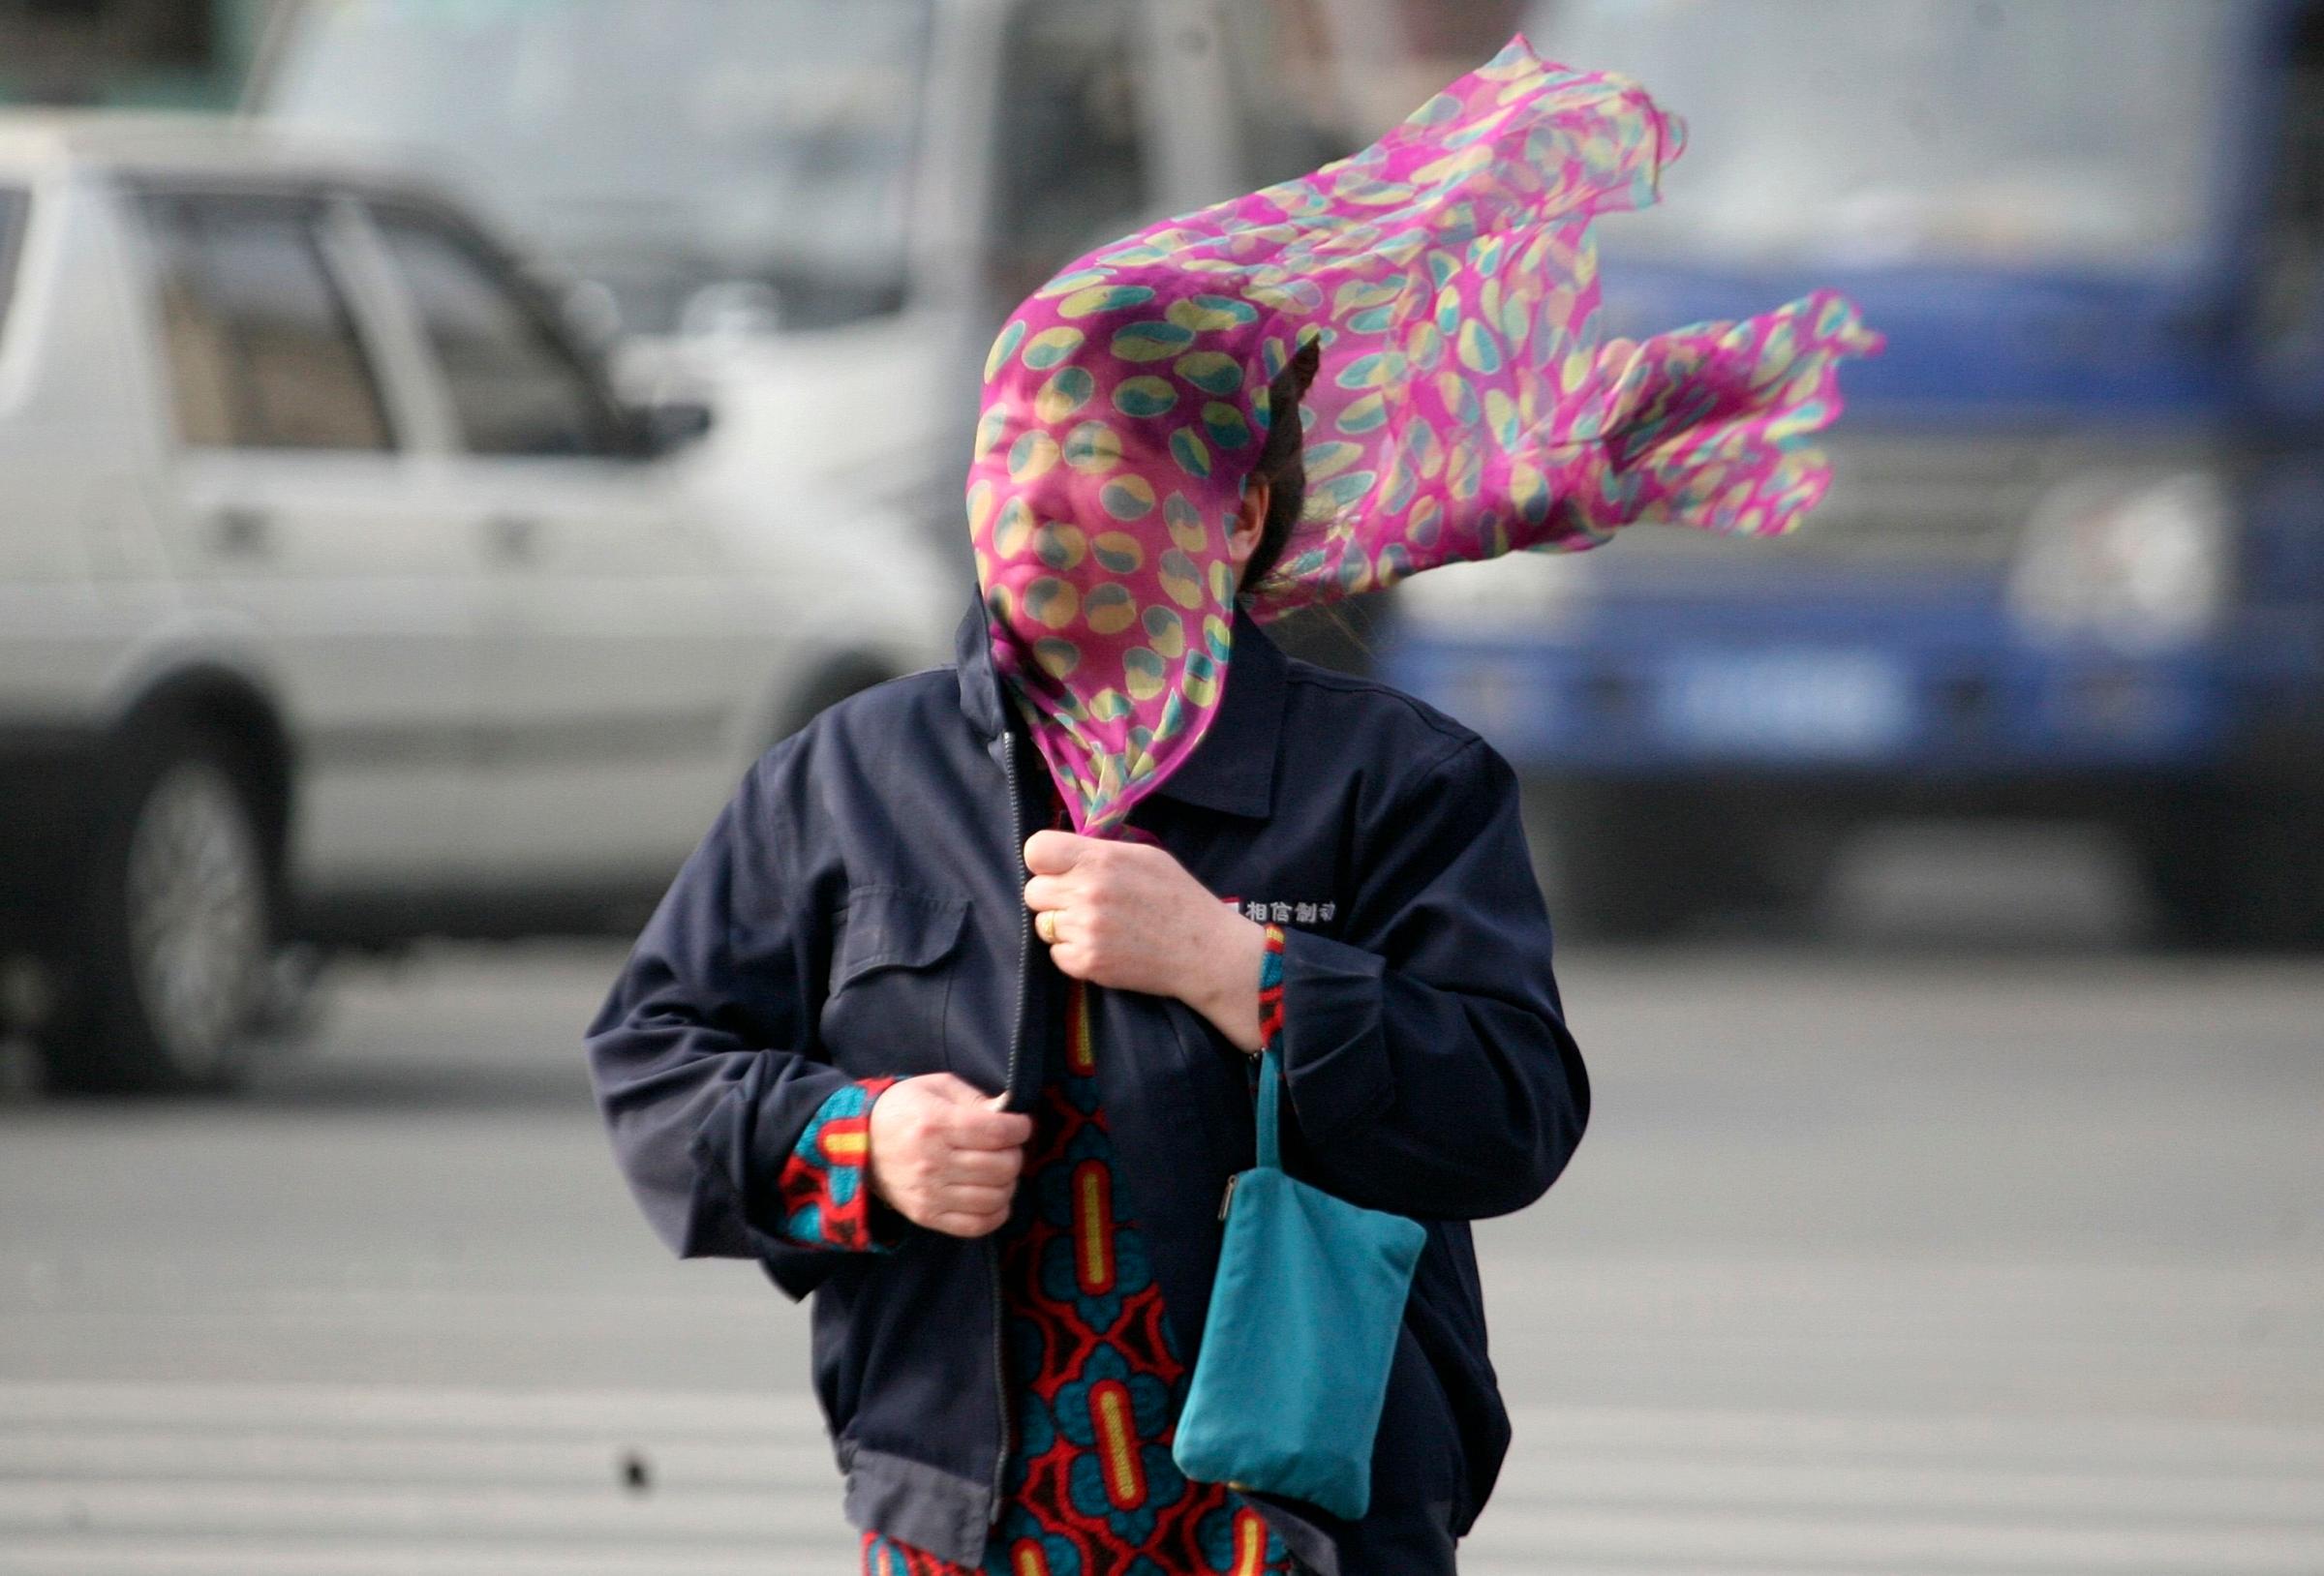 A woman covers her face with a scarf as she crosses a street amid strong wind in Shenyang